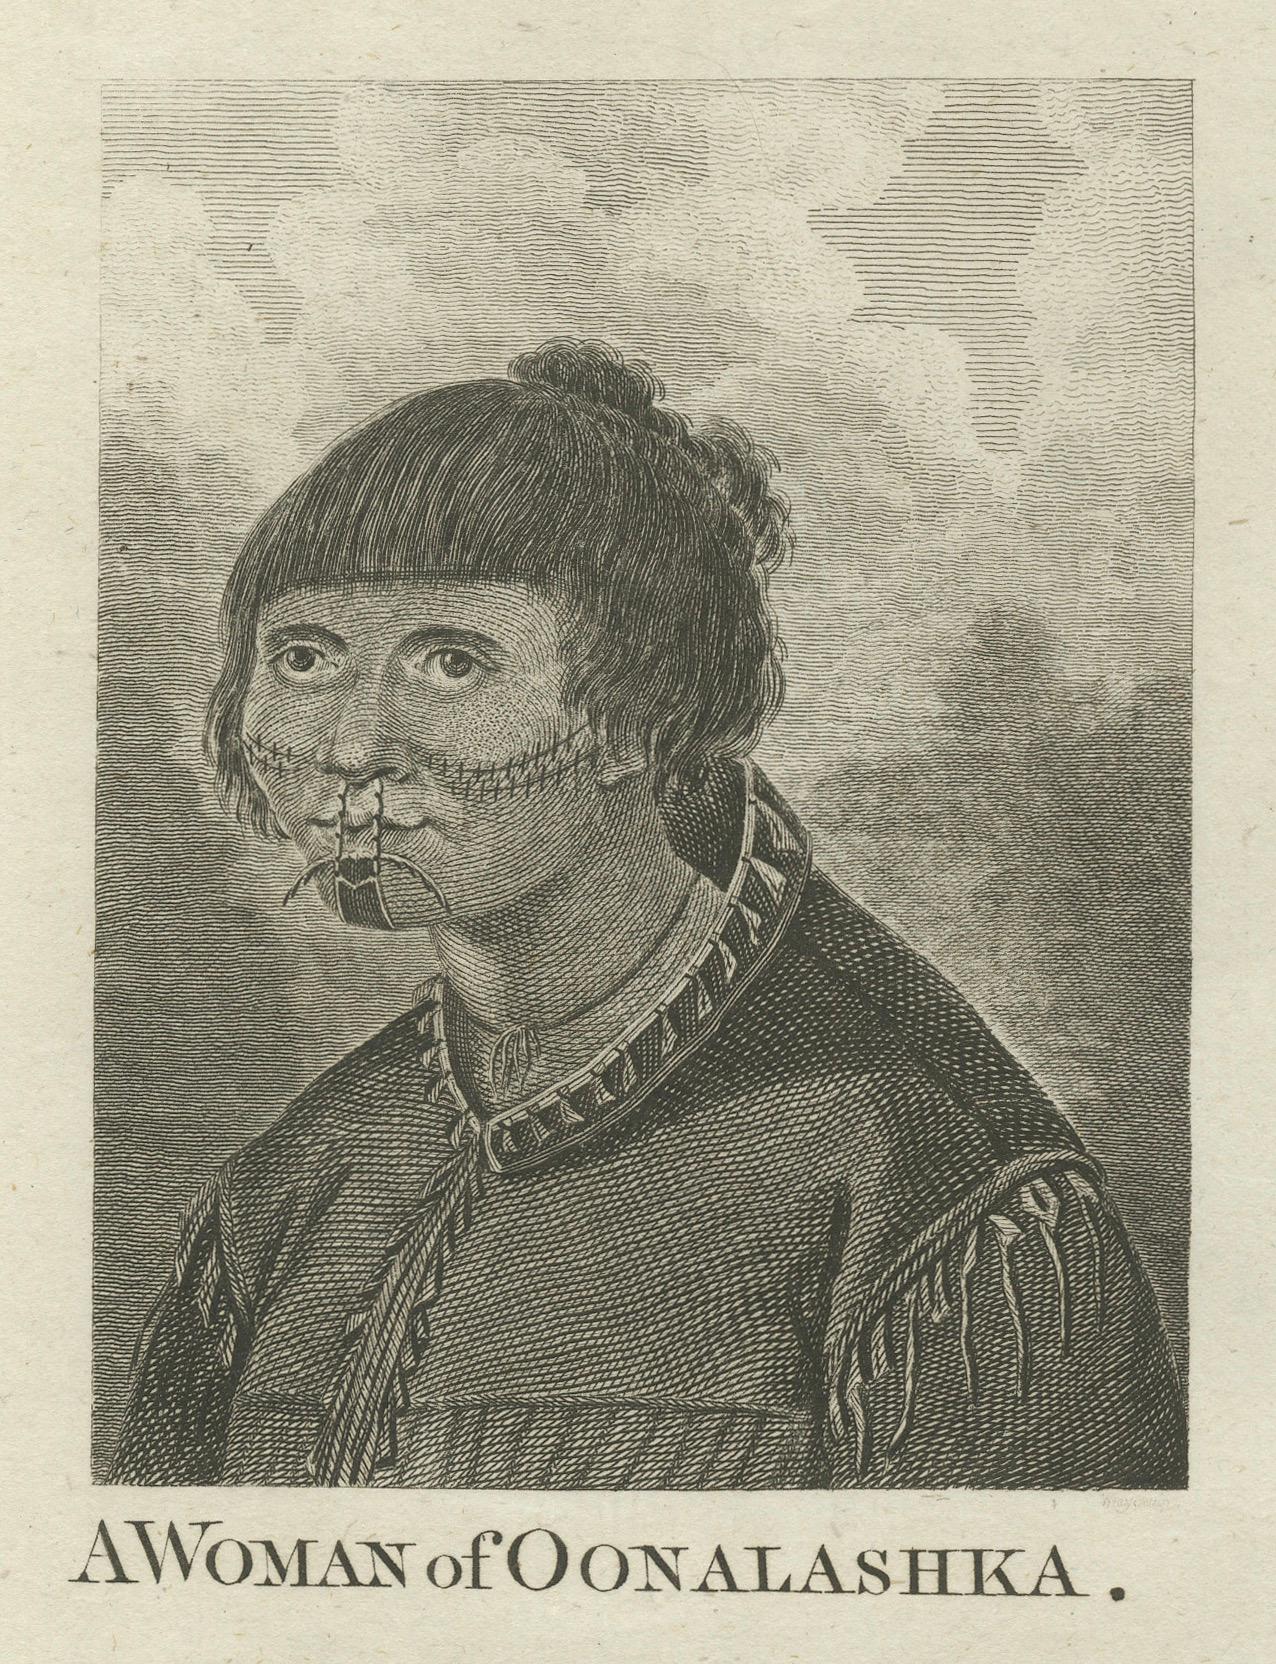 Paper Indigenous Peoples of the Bering Sea: Portraits from the 18th-Century Engravings For Sale